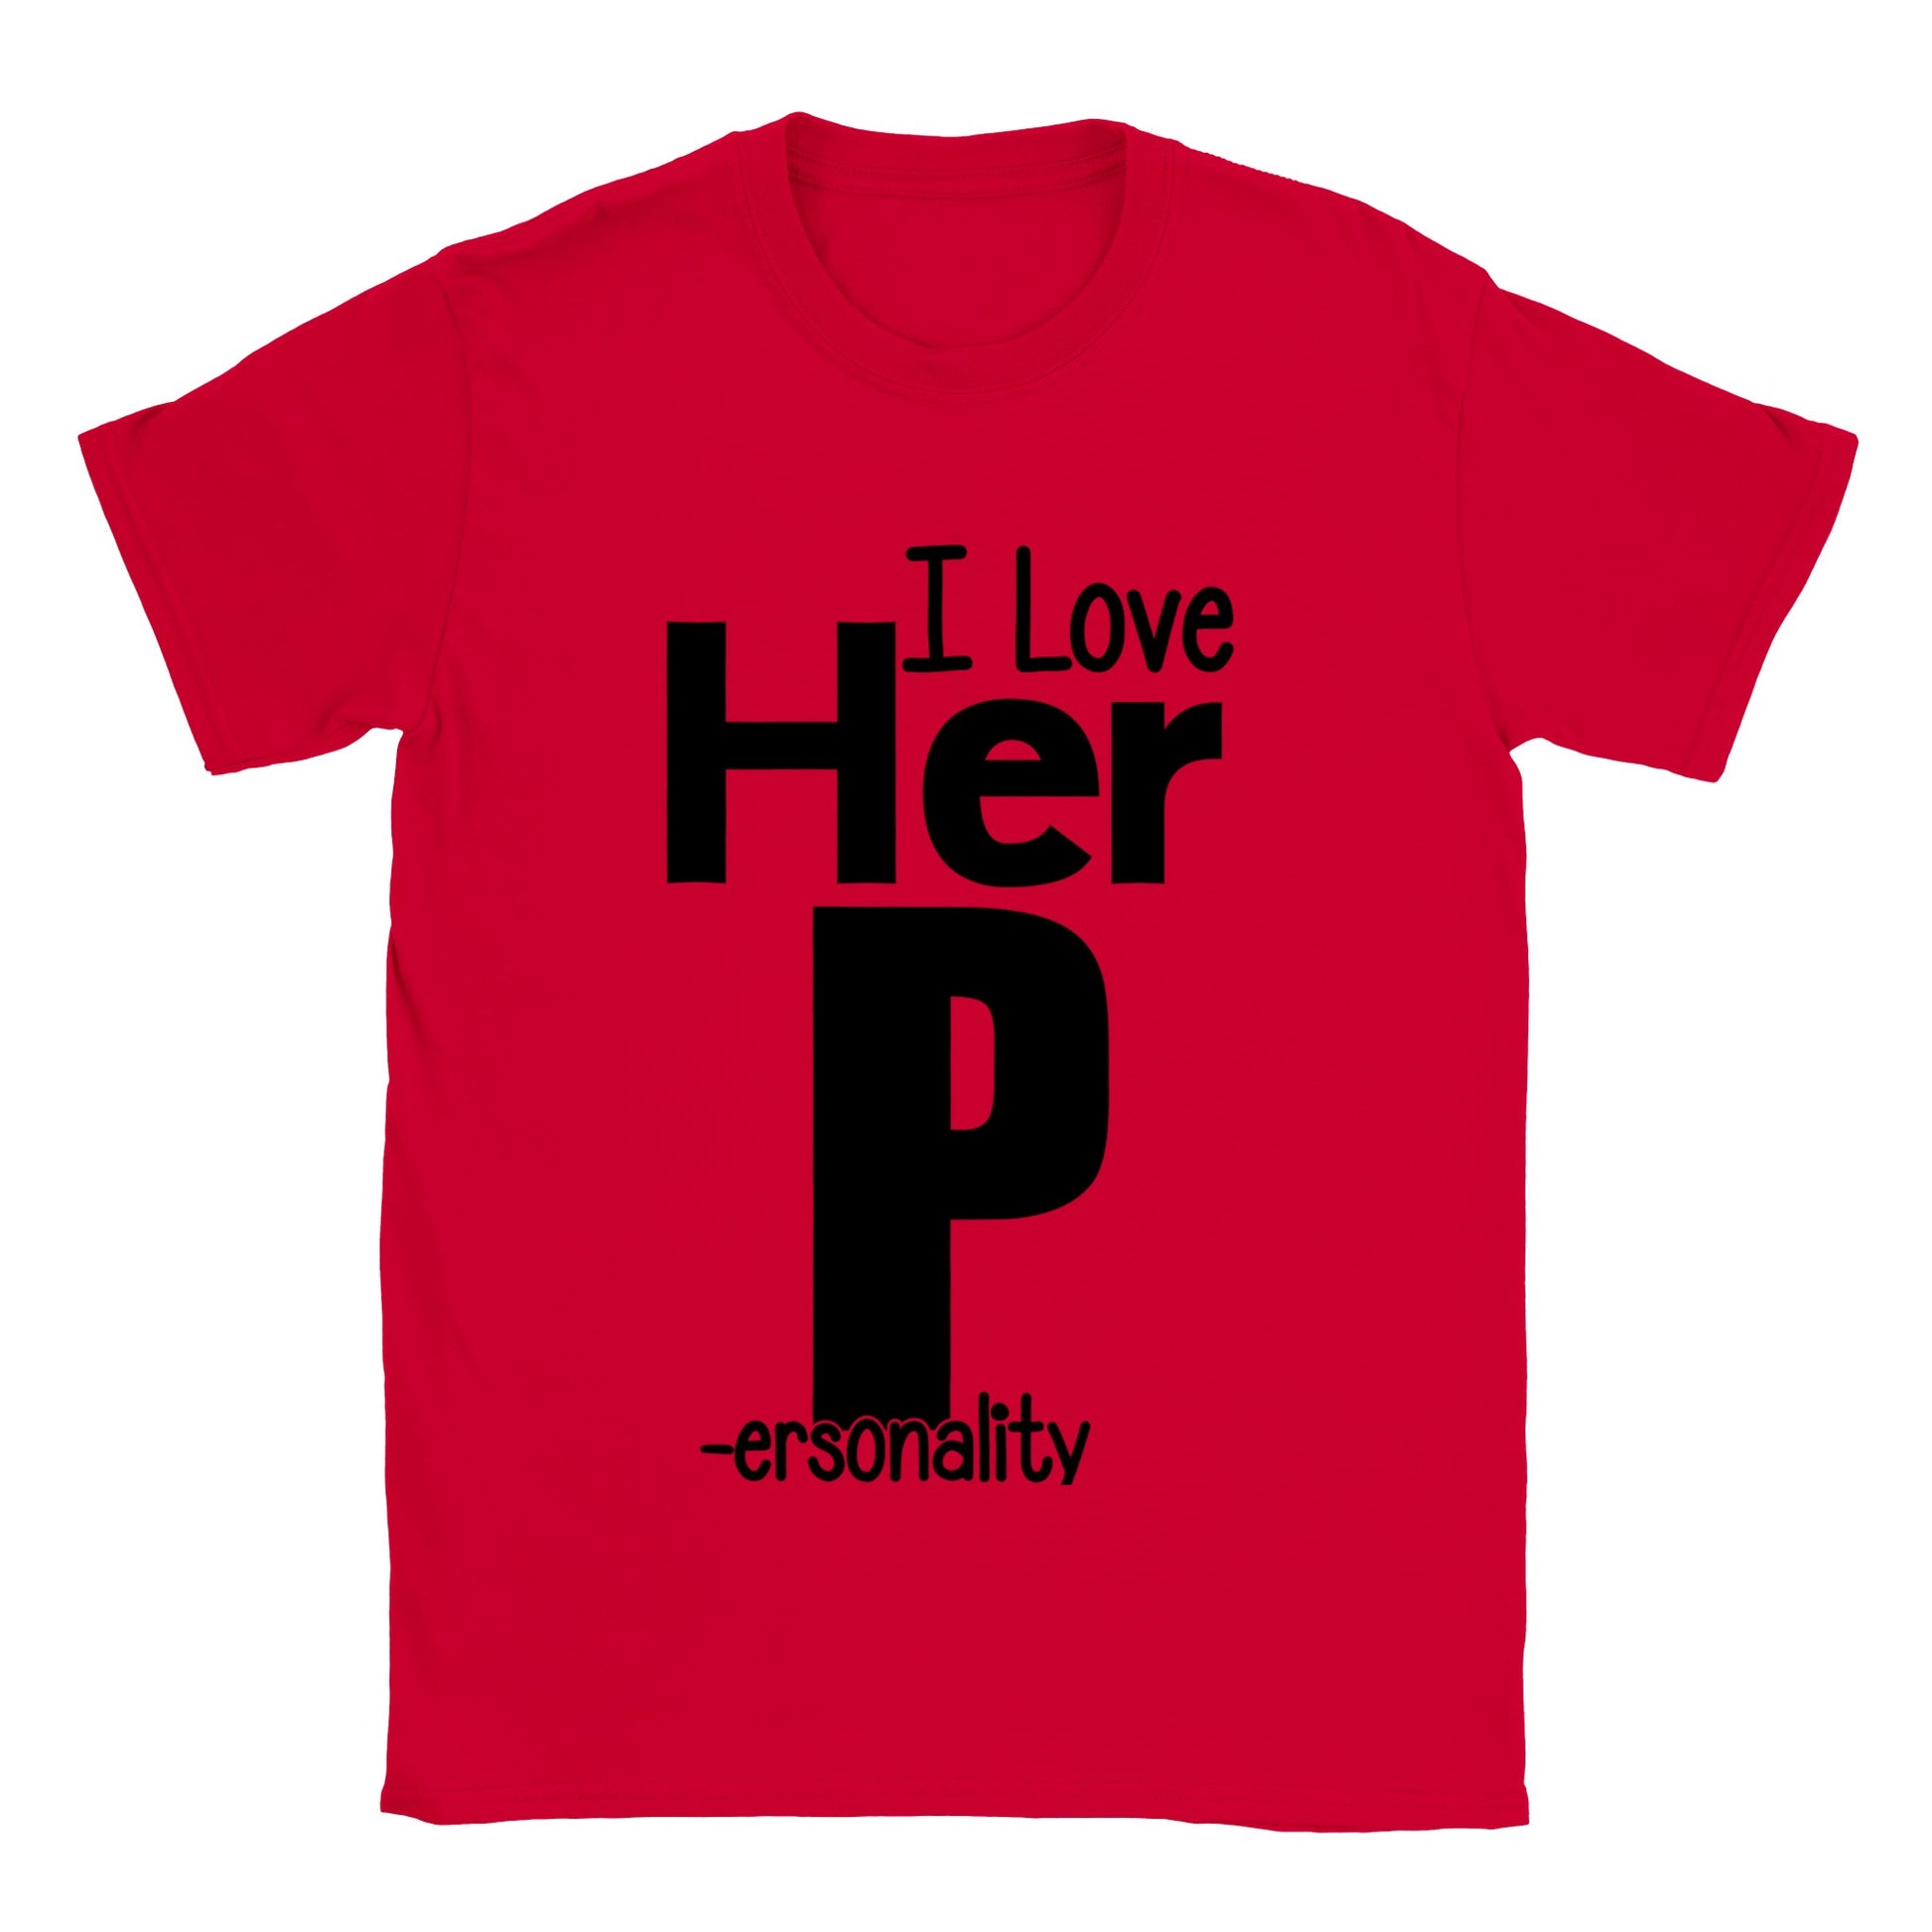 I Love Her P - ersonality T-shirt - Mister Snarky's